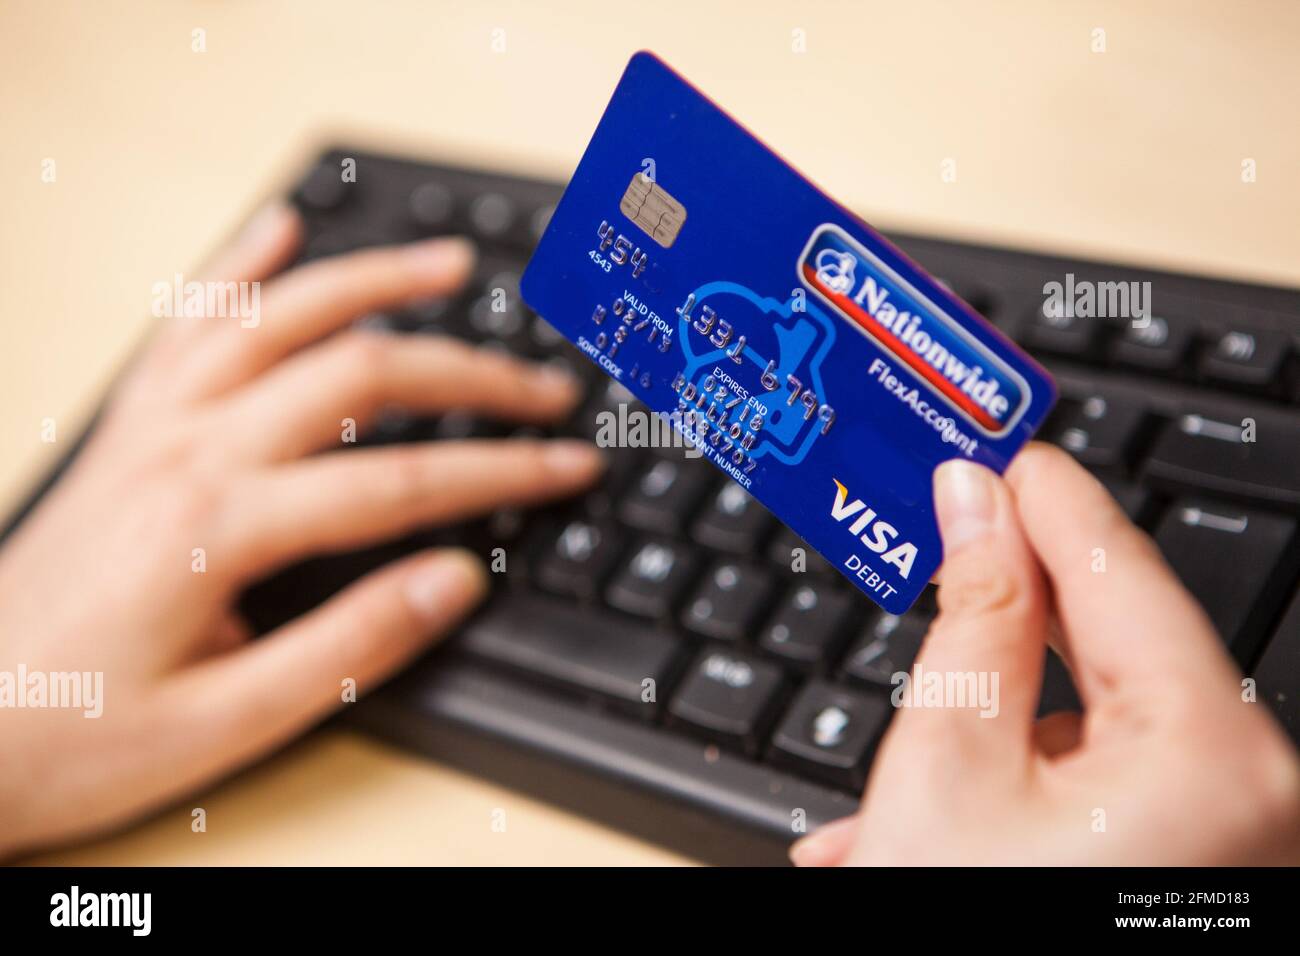 Online credit card purchase Stock Photo